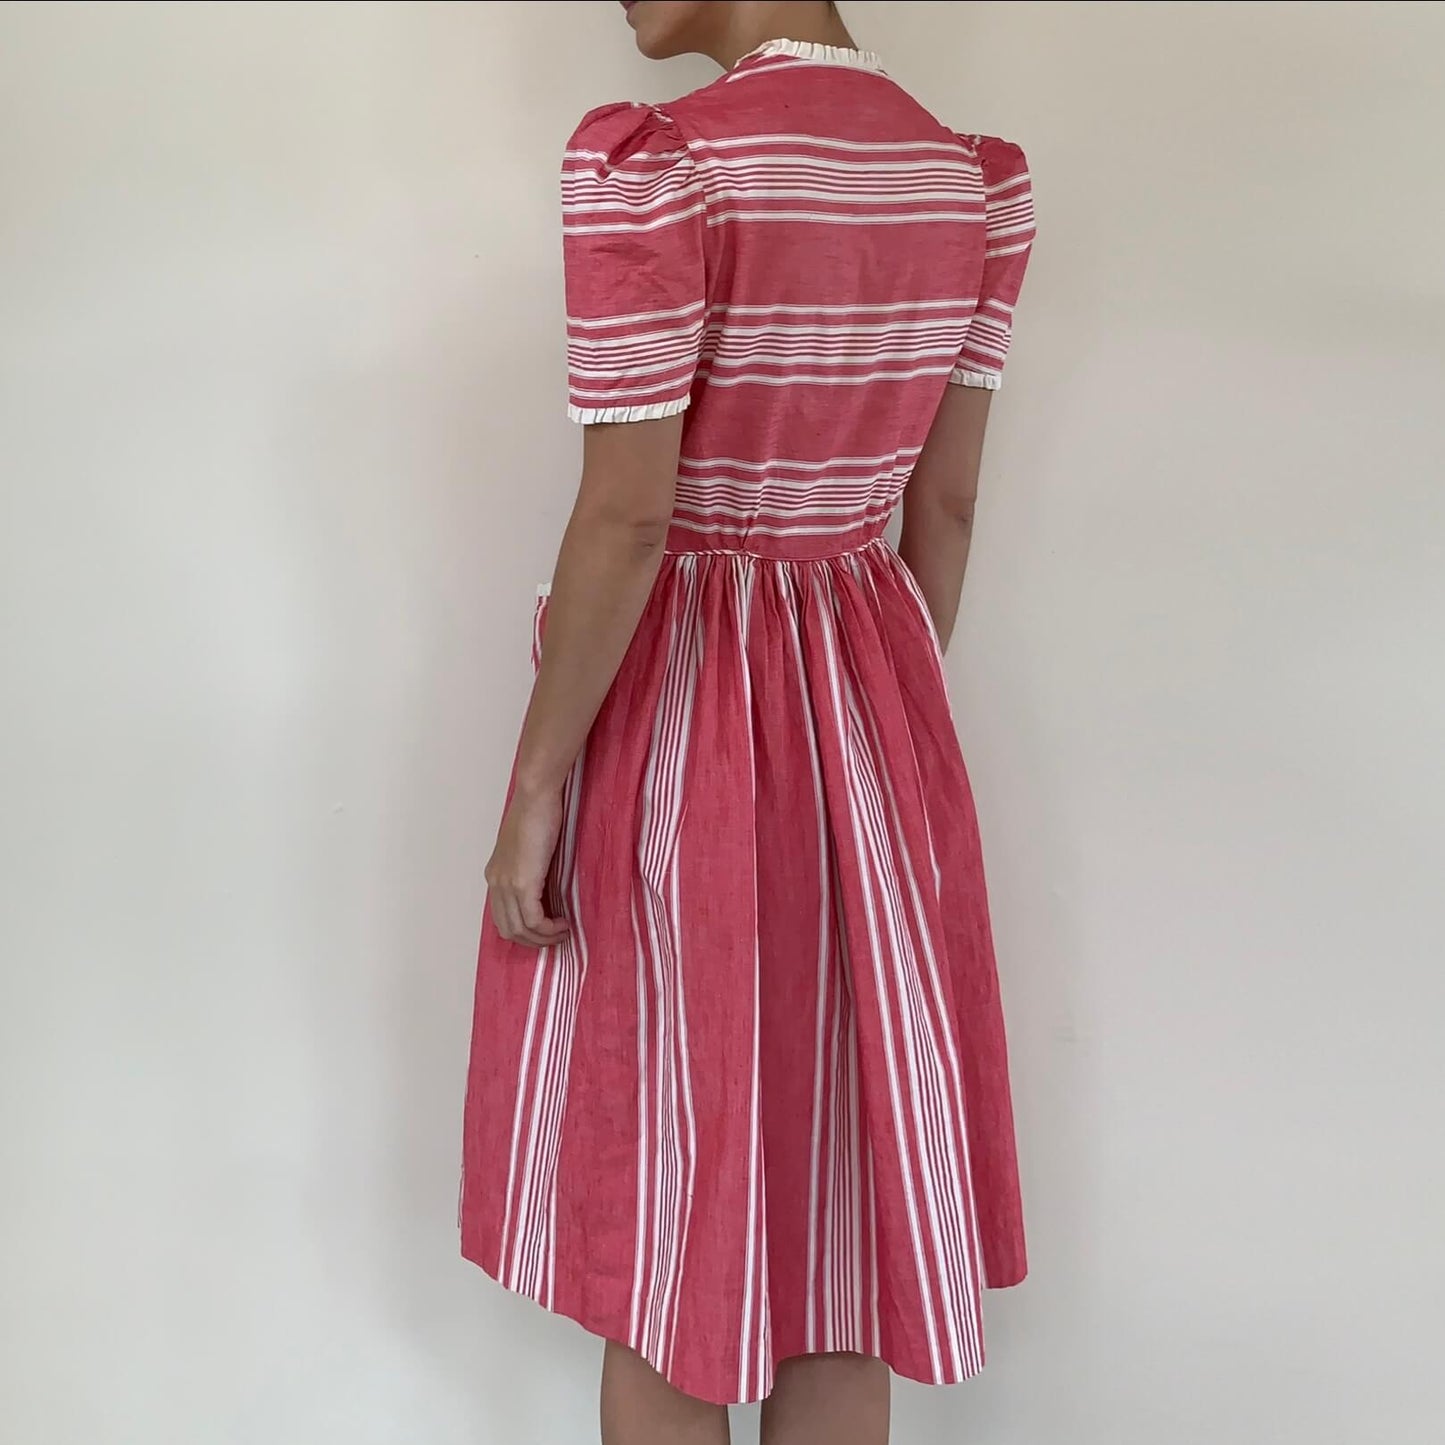 vintage pink striped dress shown from the back